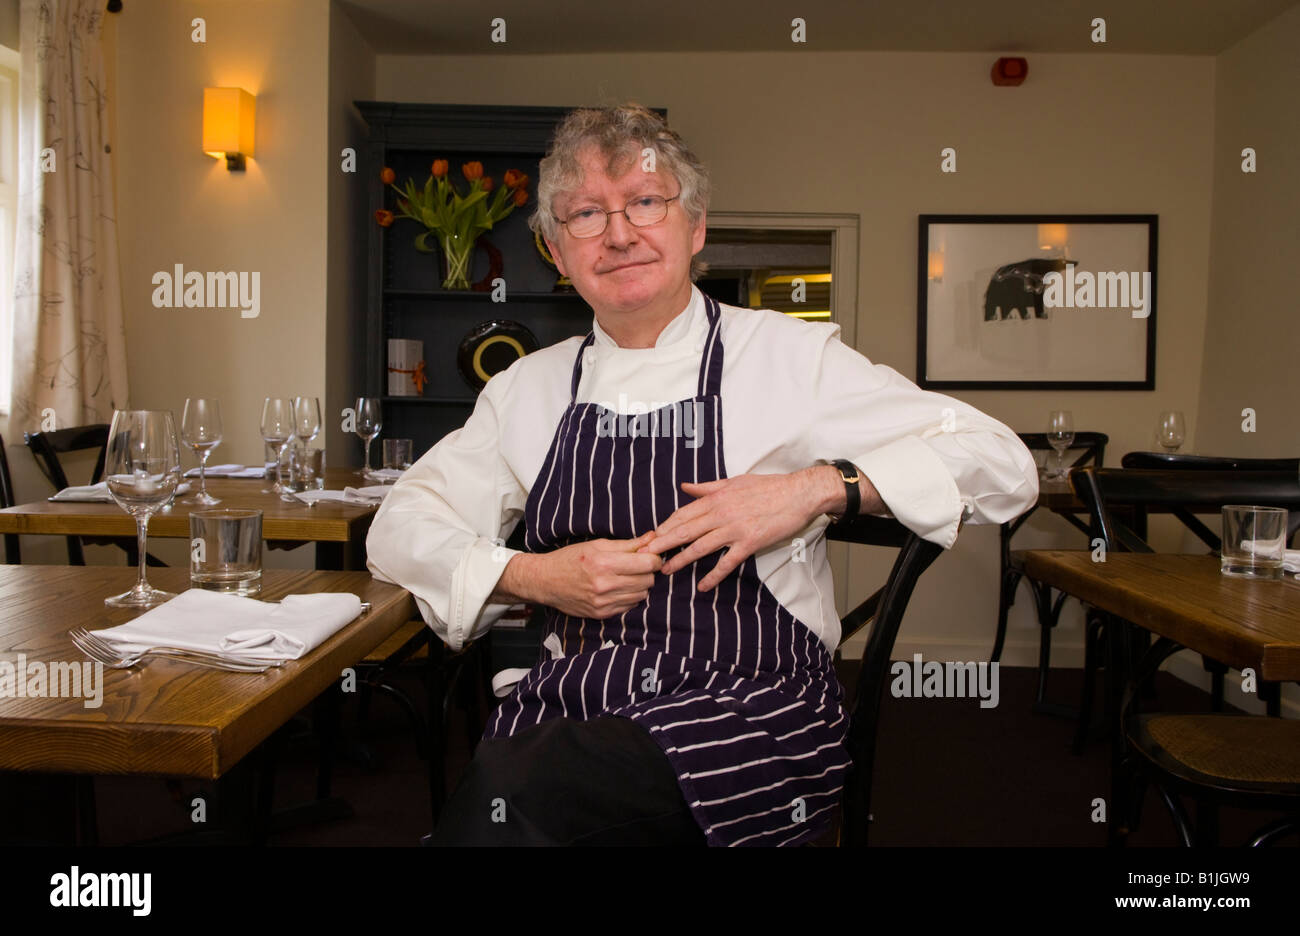 Shaun Hill chef & joint owner of The Walnut Tree Restaurant Llanddewi Skirrid Abergavenny Monmouthshire pictured in dining room Stock Photo